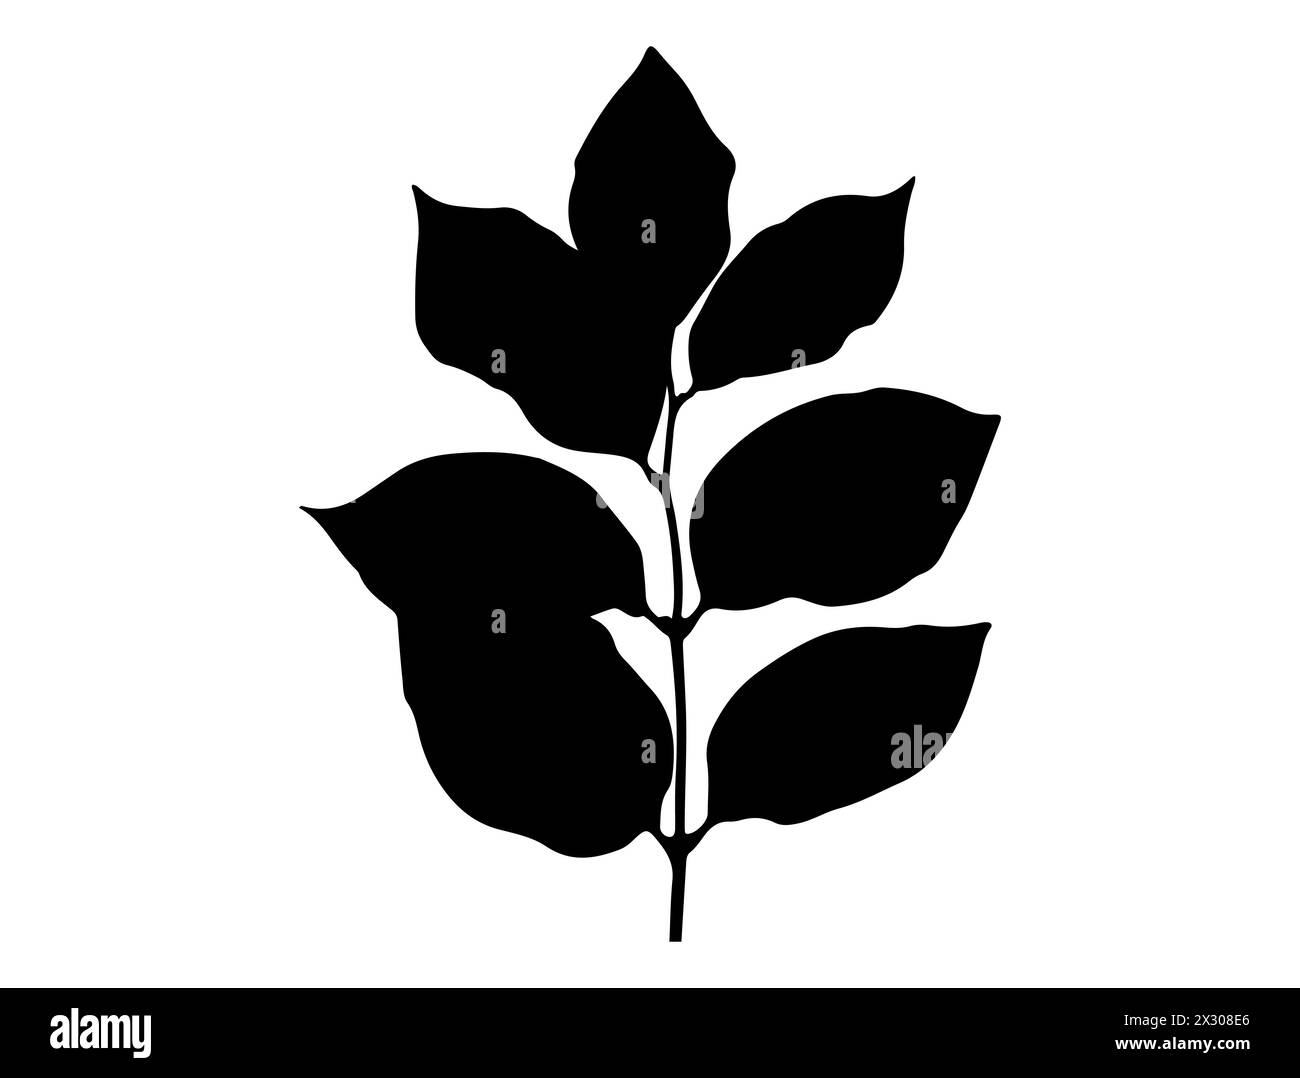 Branch with leaves silhouette vector art Stock Vector